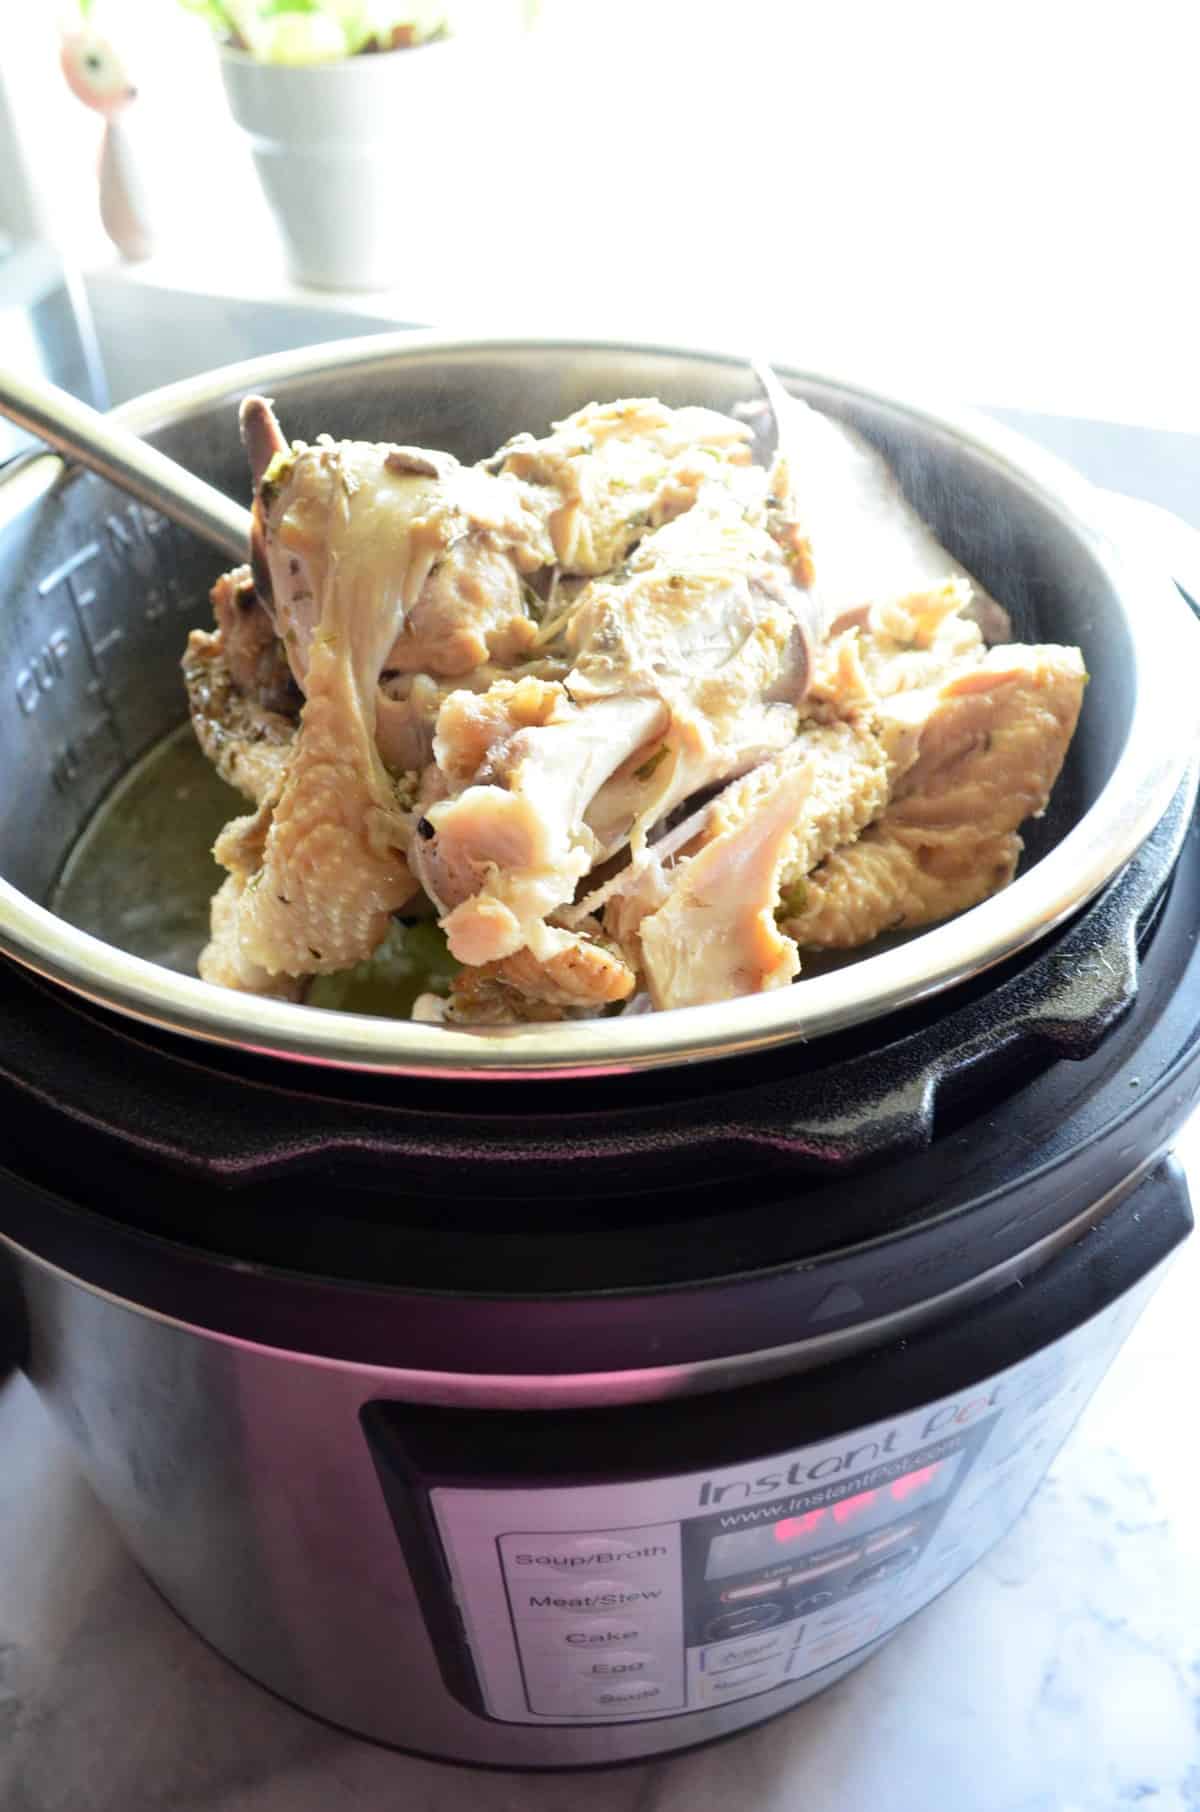 close up side view of turkey in instant pot with yellowish broth.